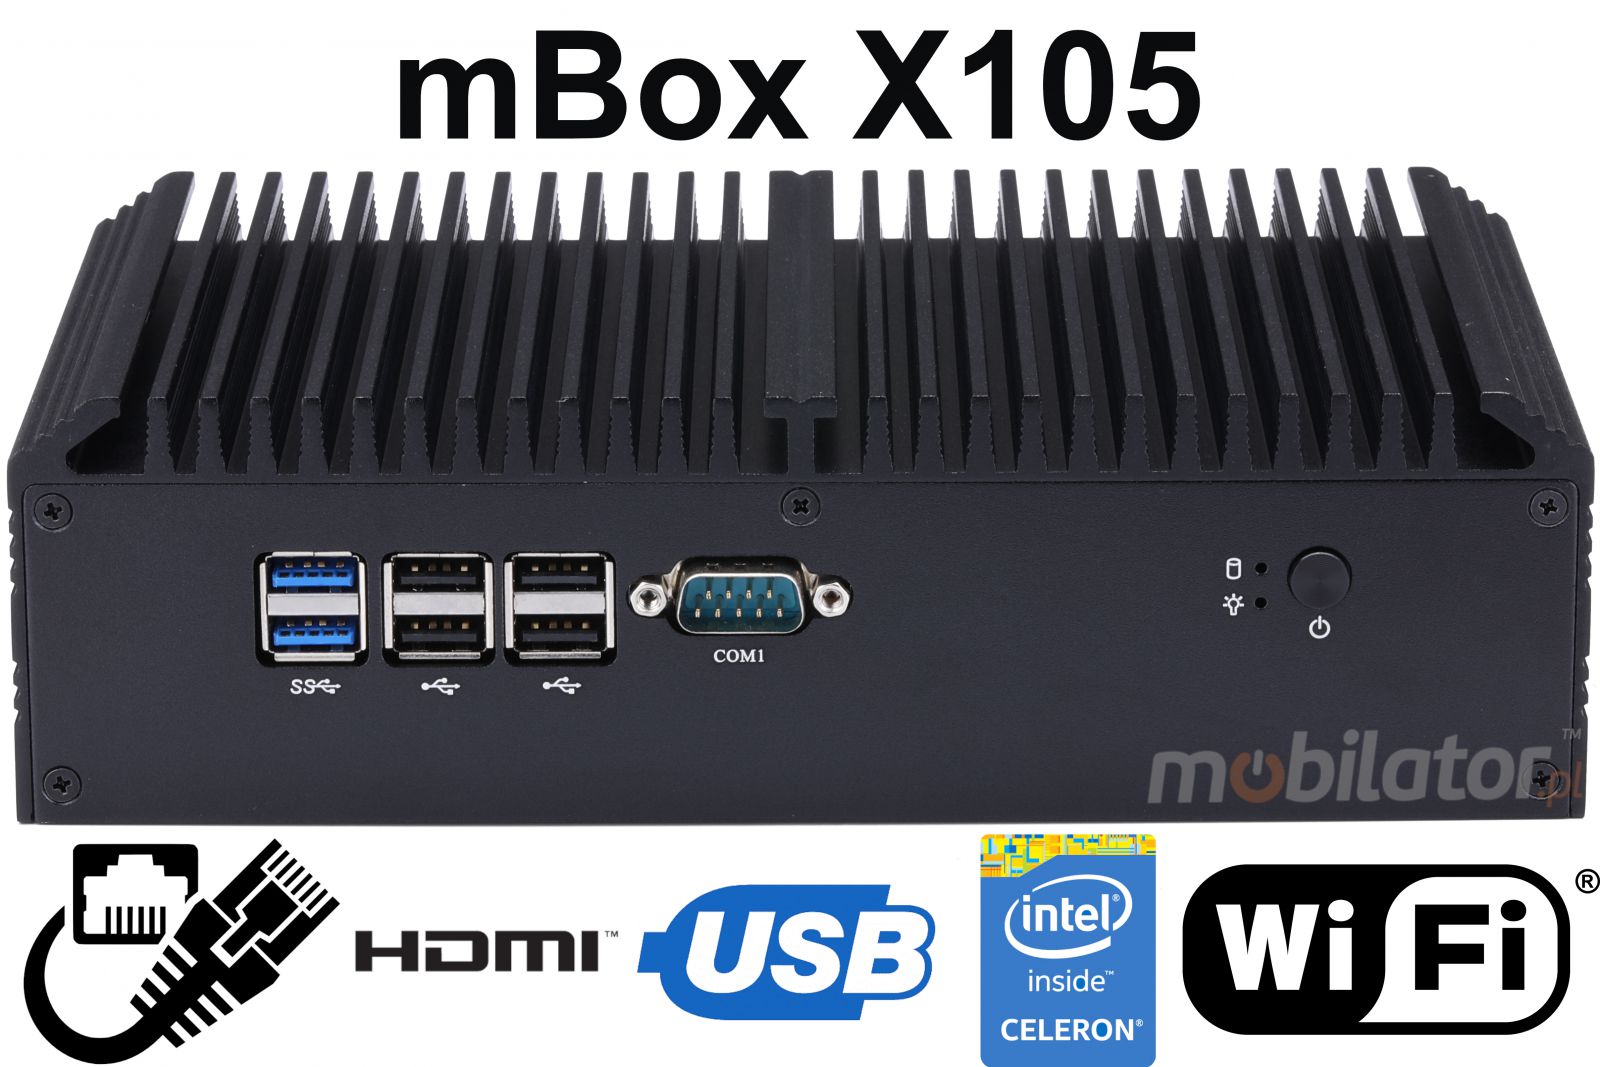 mBox X105 v.2 - Industrial Mini Computer with Intel Celeron 3855U Processor - M.2 disk (with second disk option) - USB 3.0, 2x HDMI and WiFi - Title image